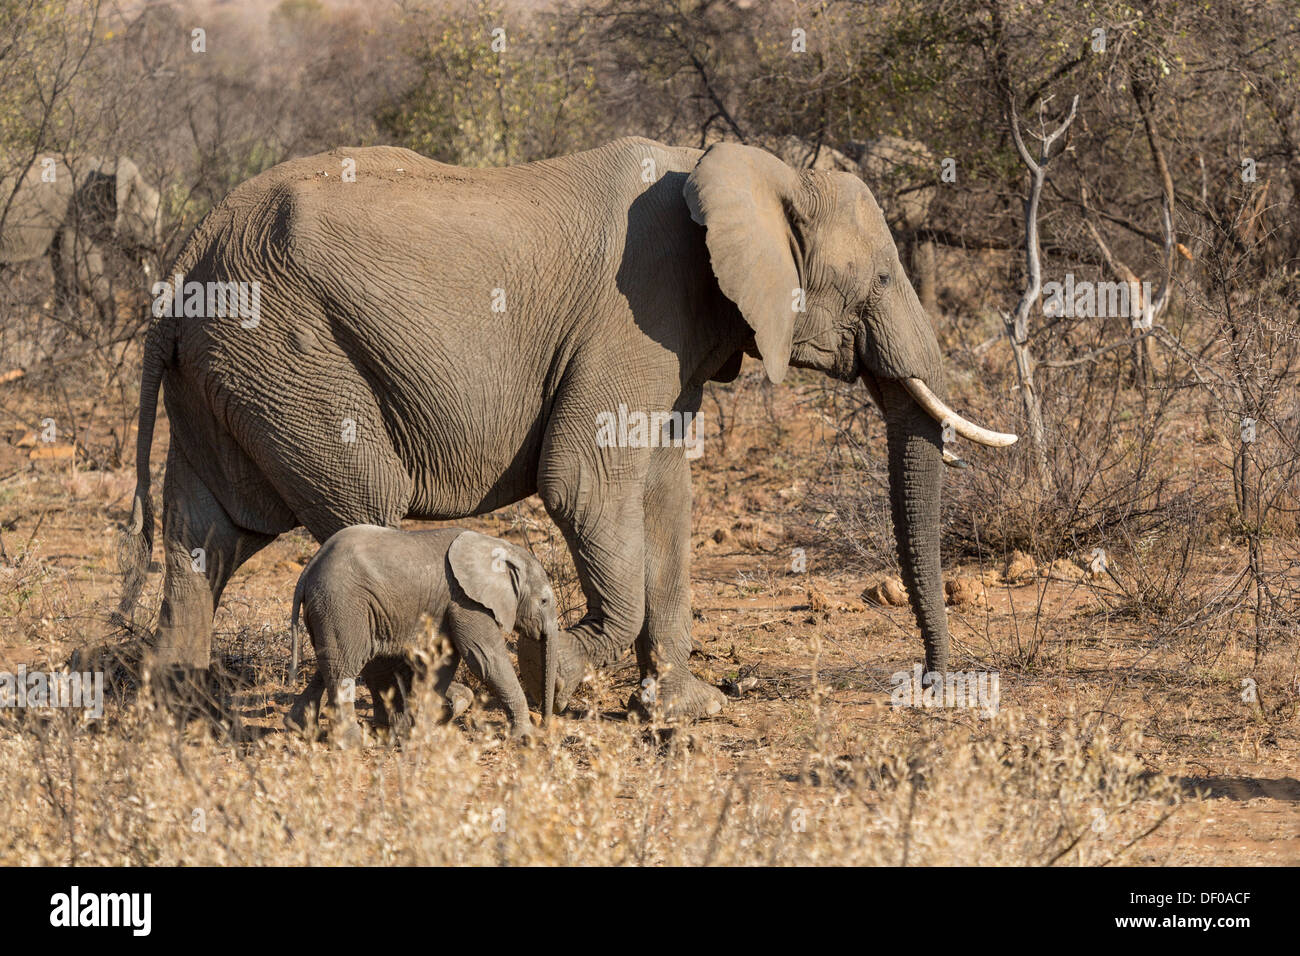 A mother and a baby elephant wandering in the grasslands of South Africa's Pilanesberg National Park Stock Photo